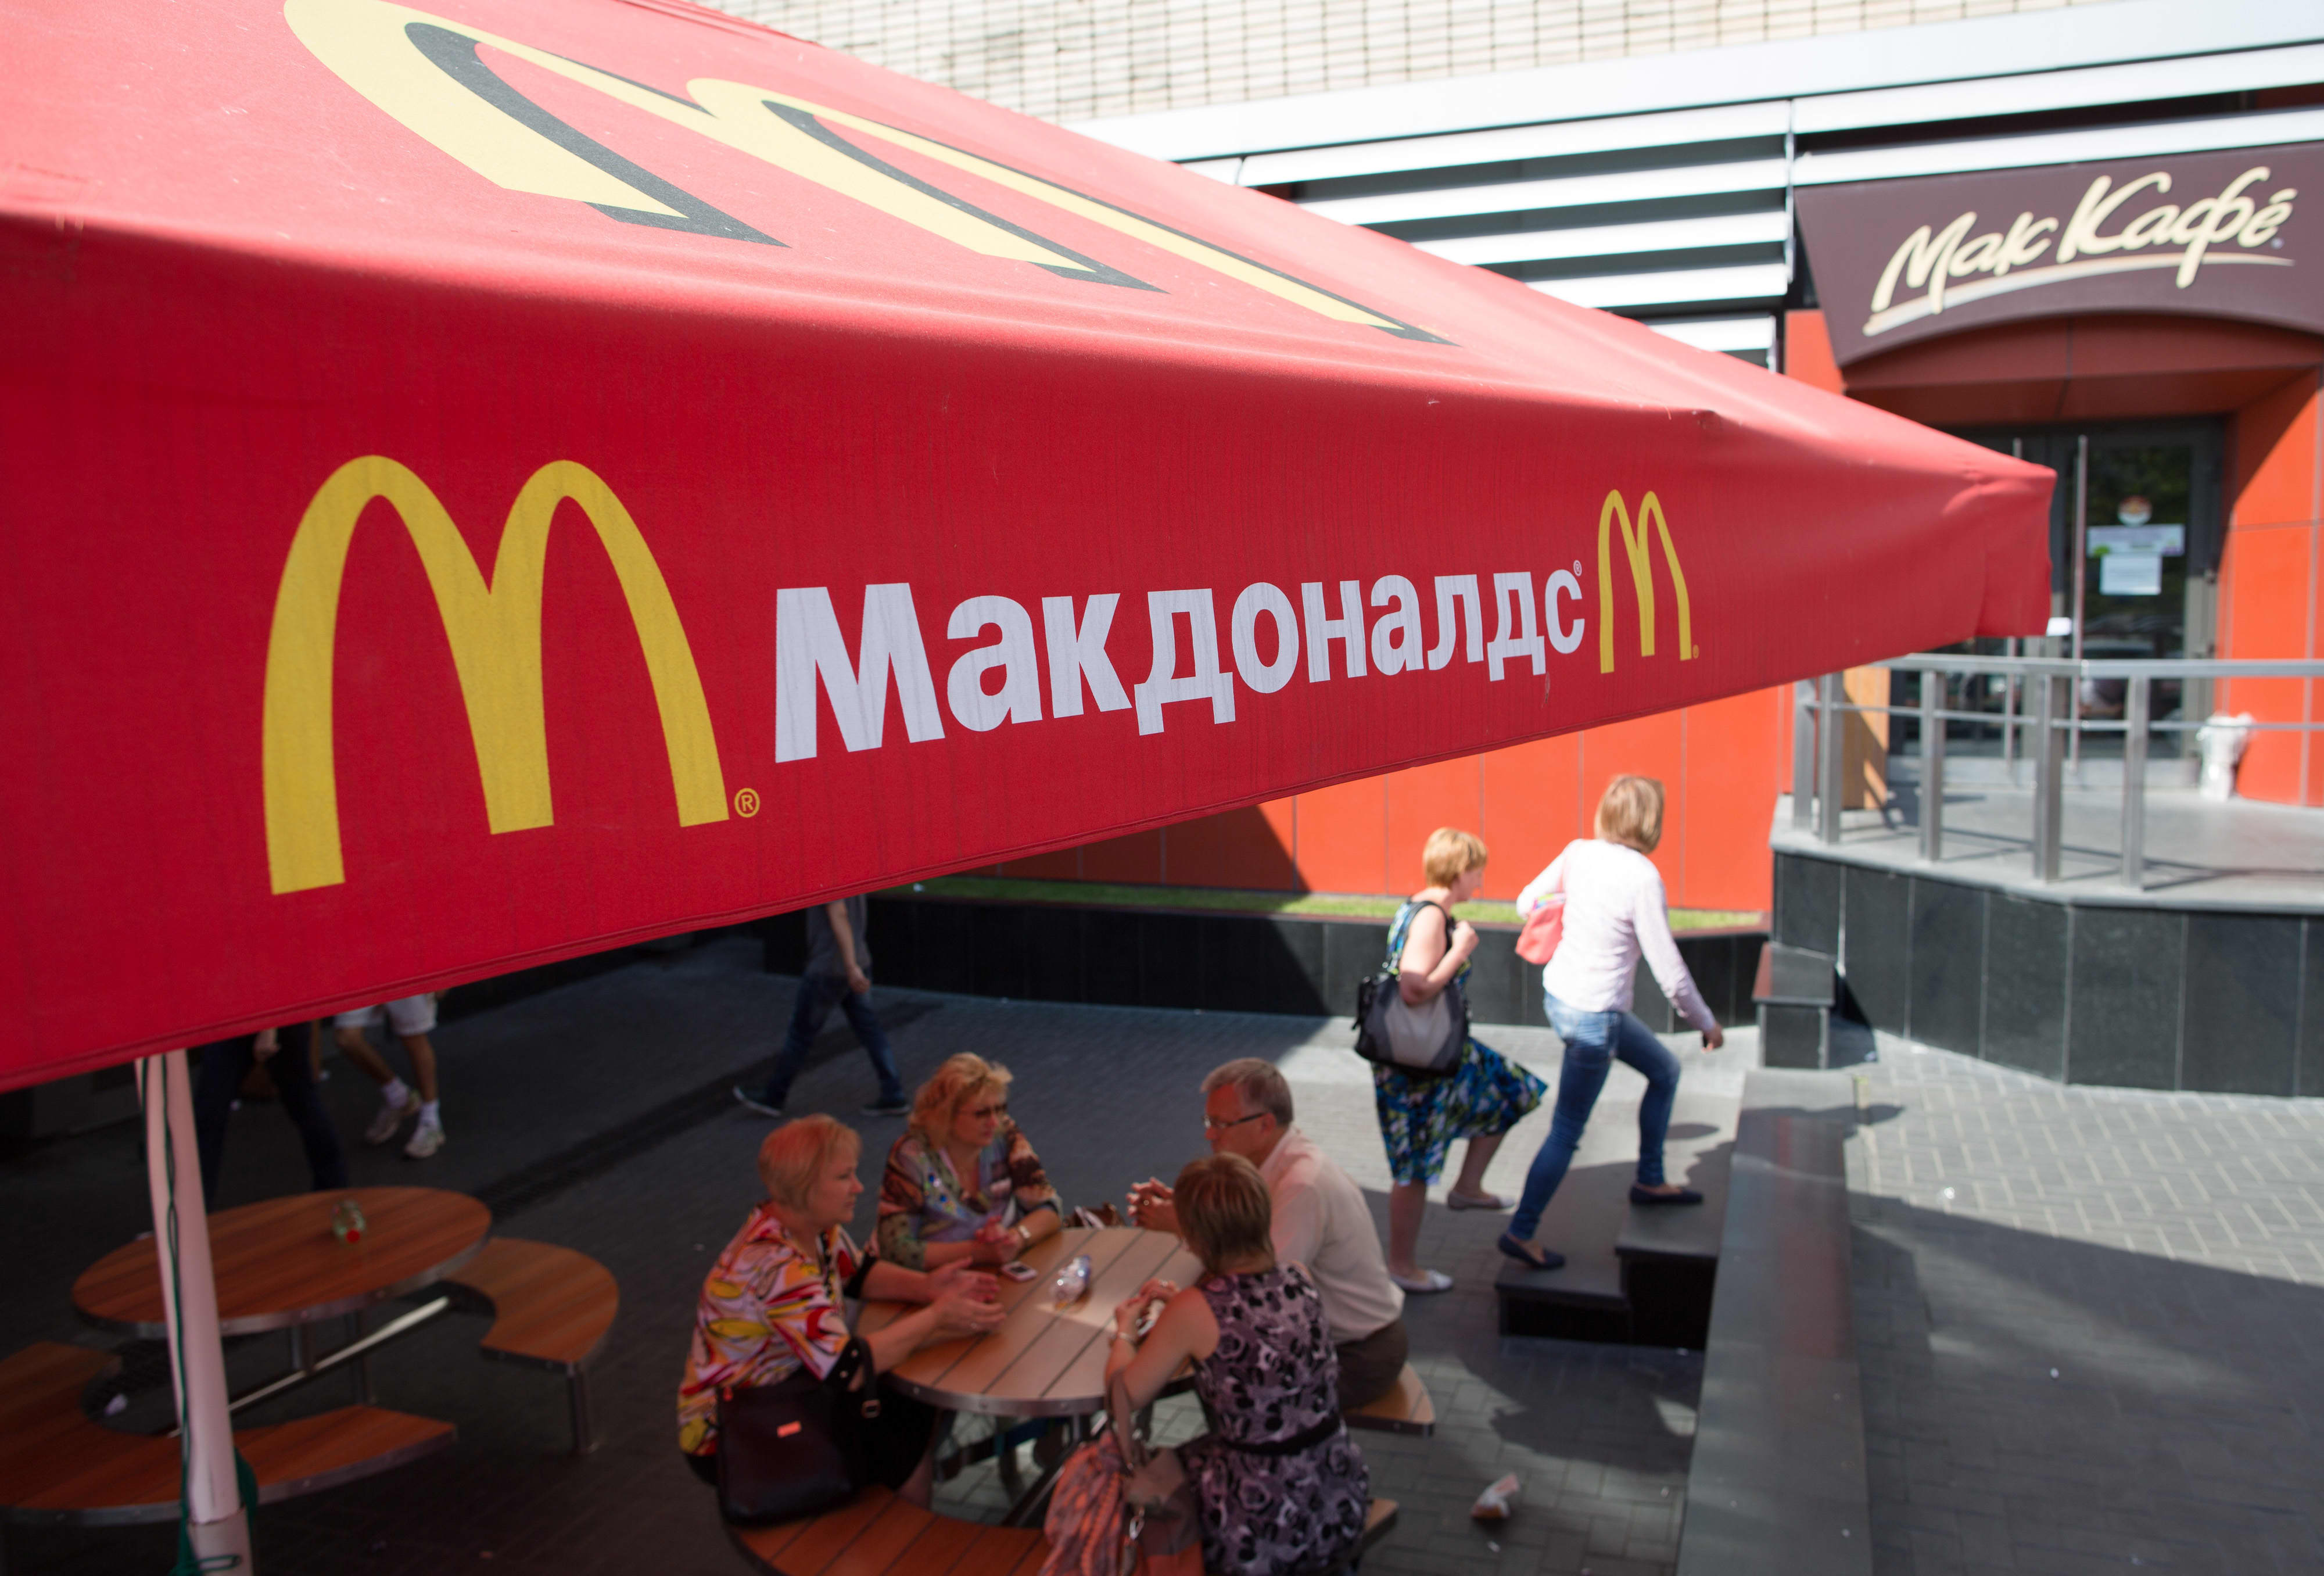 McDonald’s will temporarily close 850 restaurants in Russia, nearly 2 weeks afte..